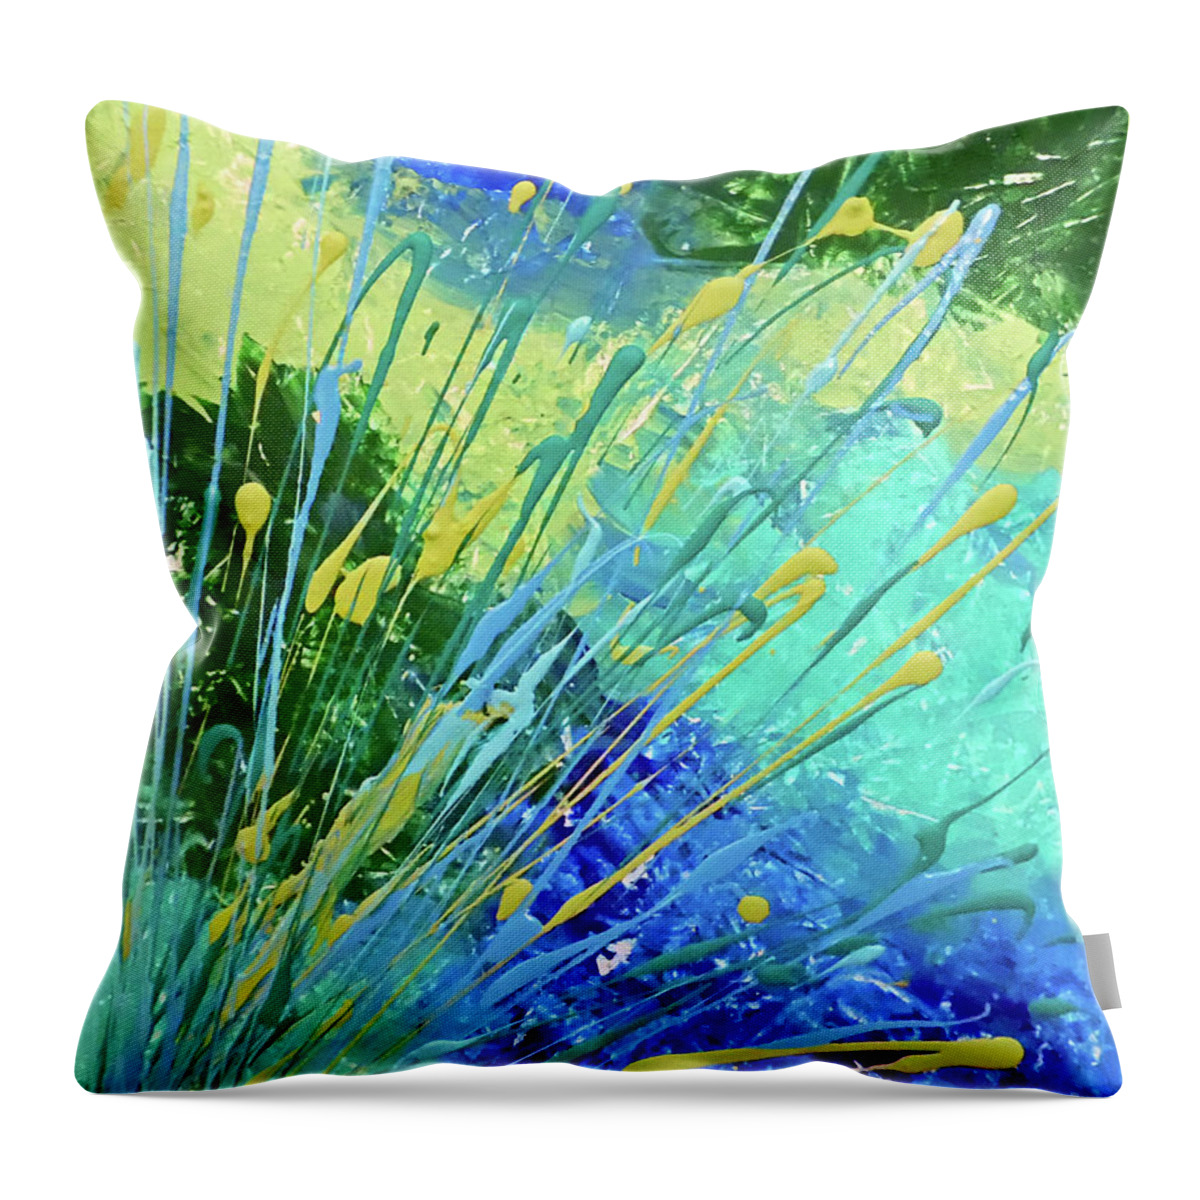 Neon Abstract Throw Pillow featuring the painting Envy by Jilian Cramb - AMothersFineArt